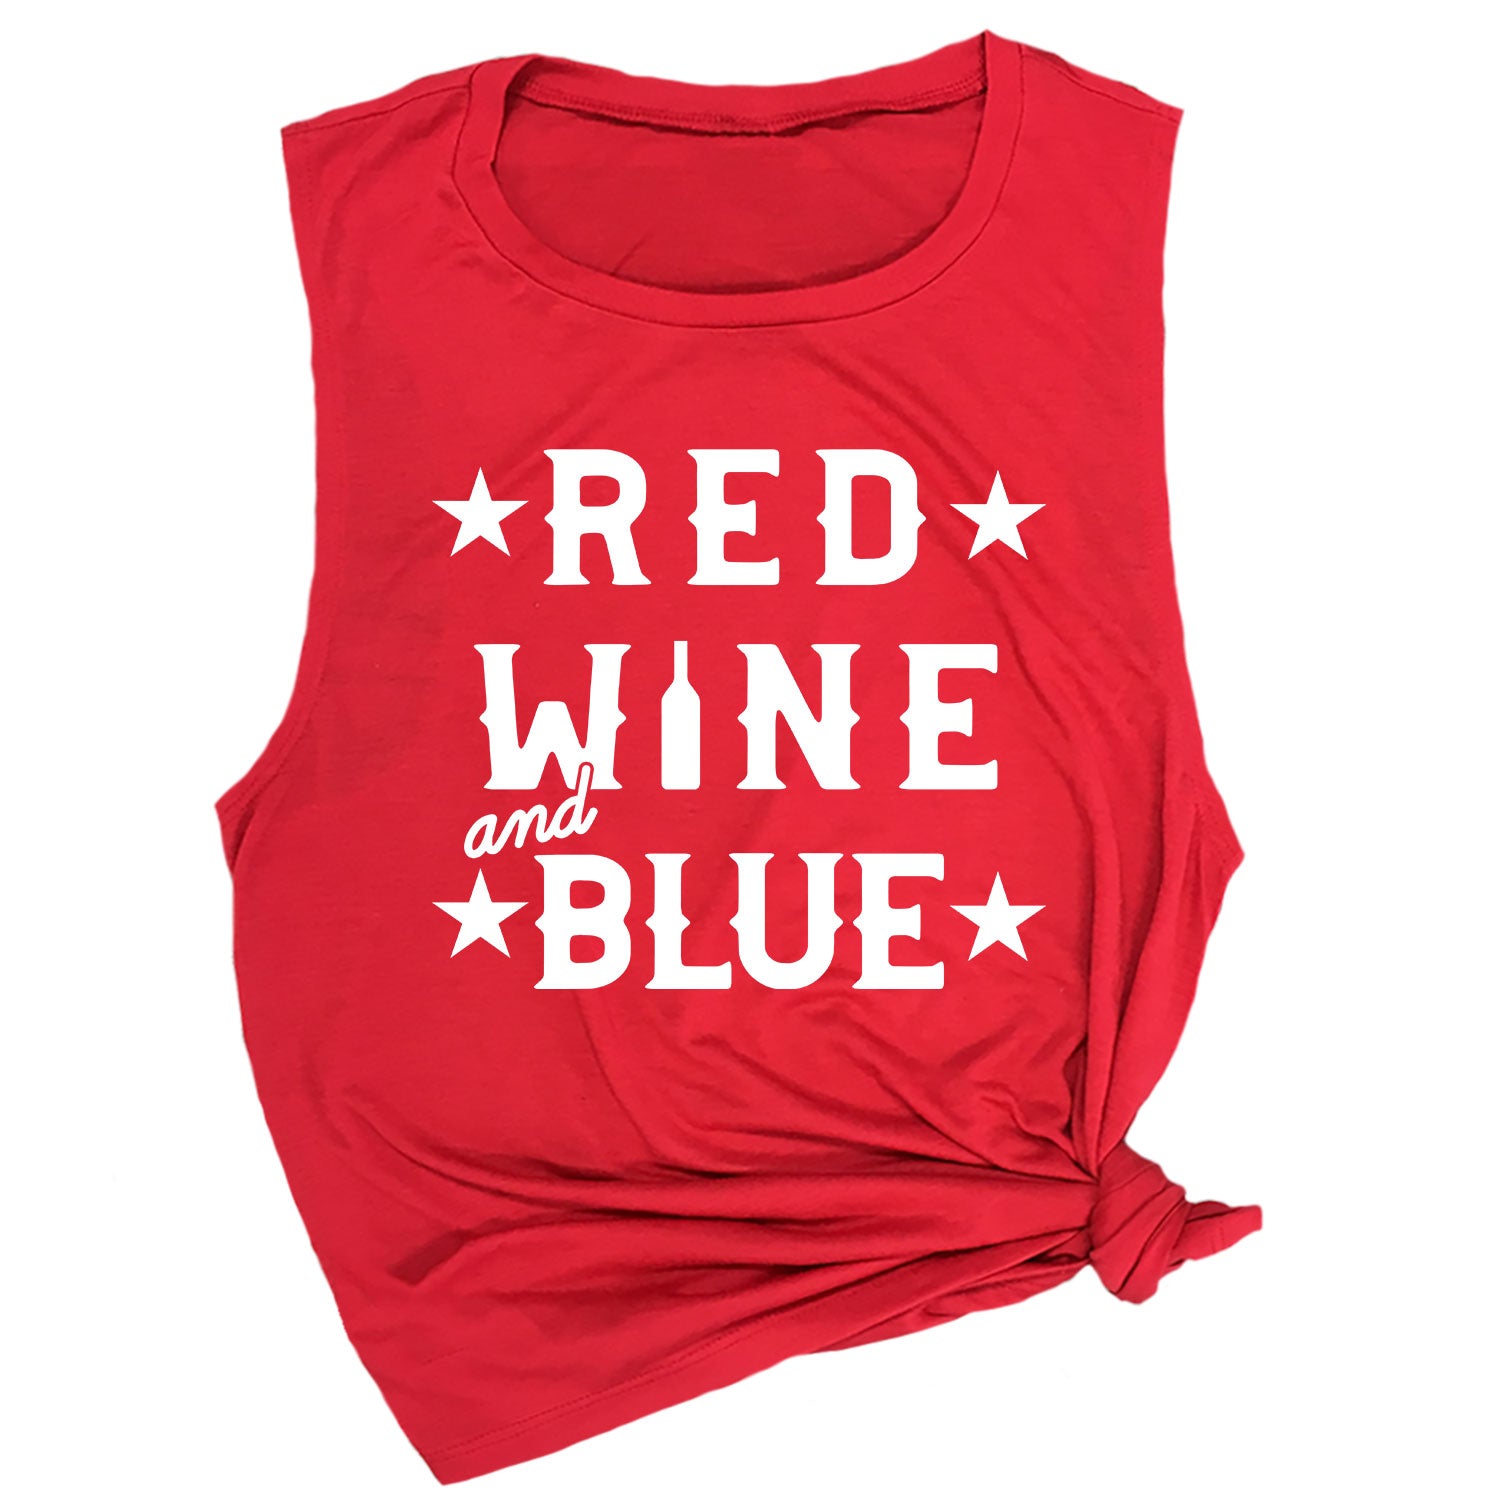 Red, Wine & Blue Muscle Tee